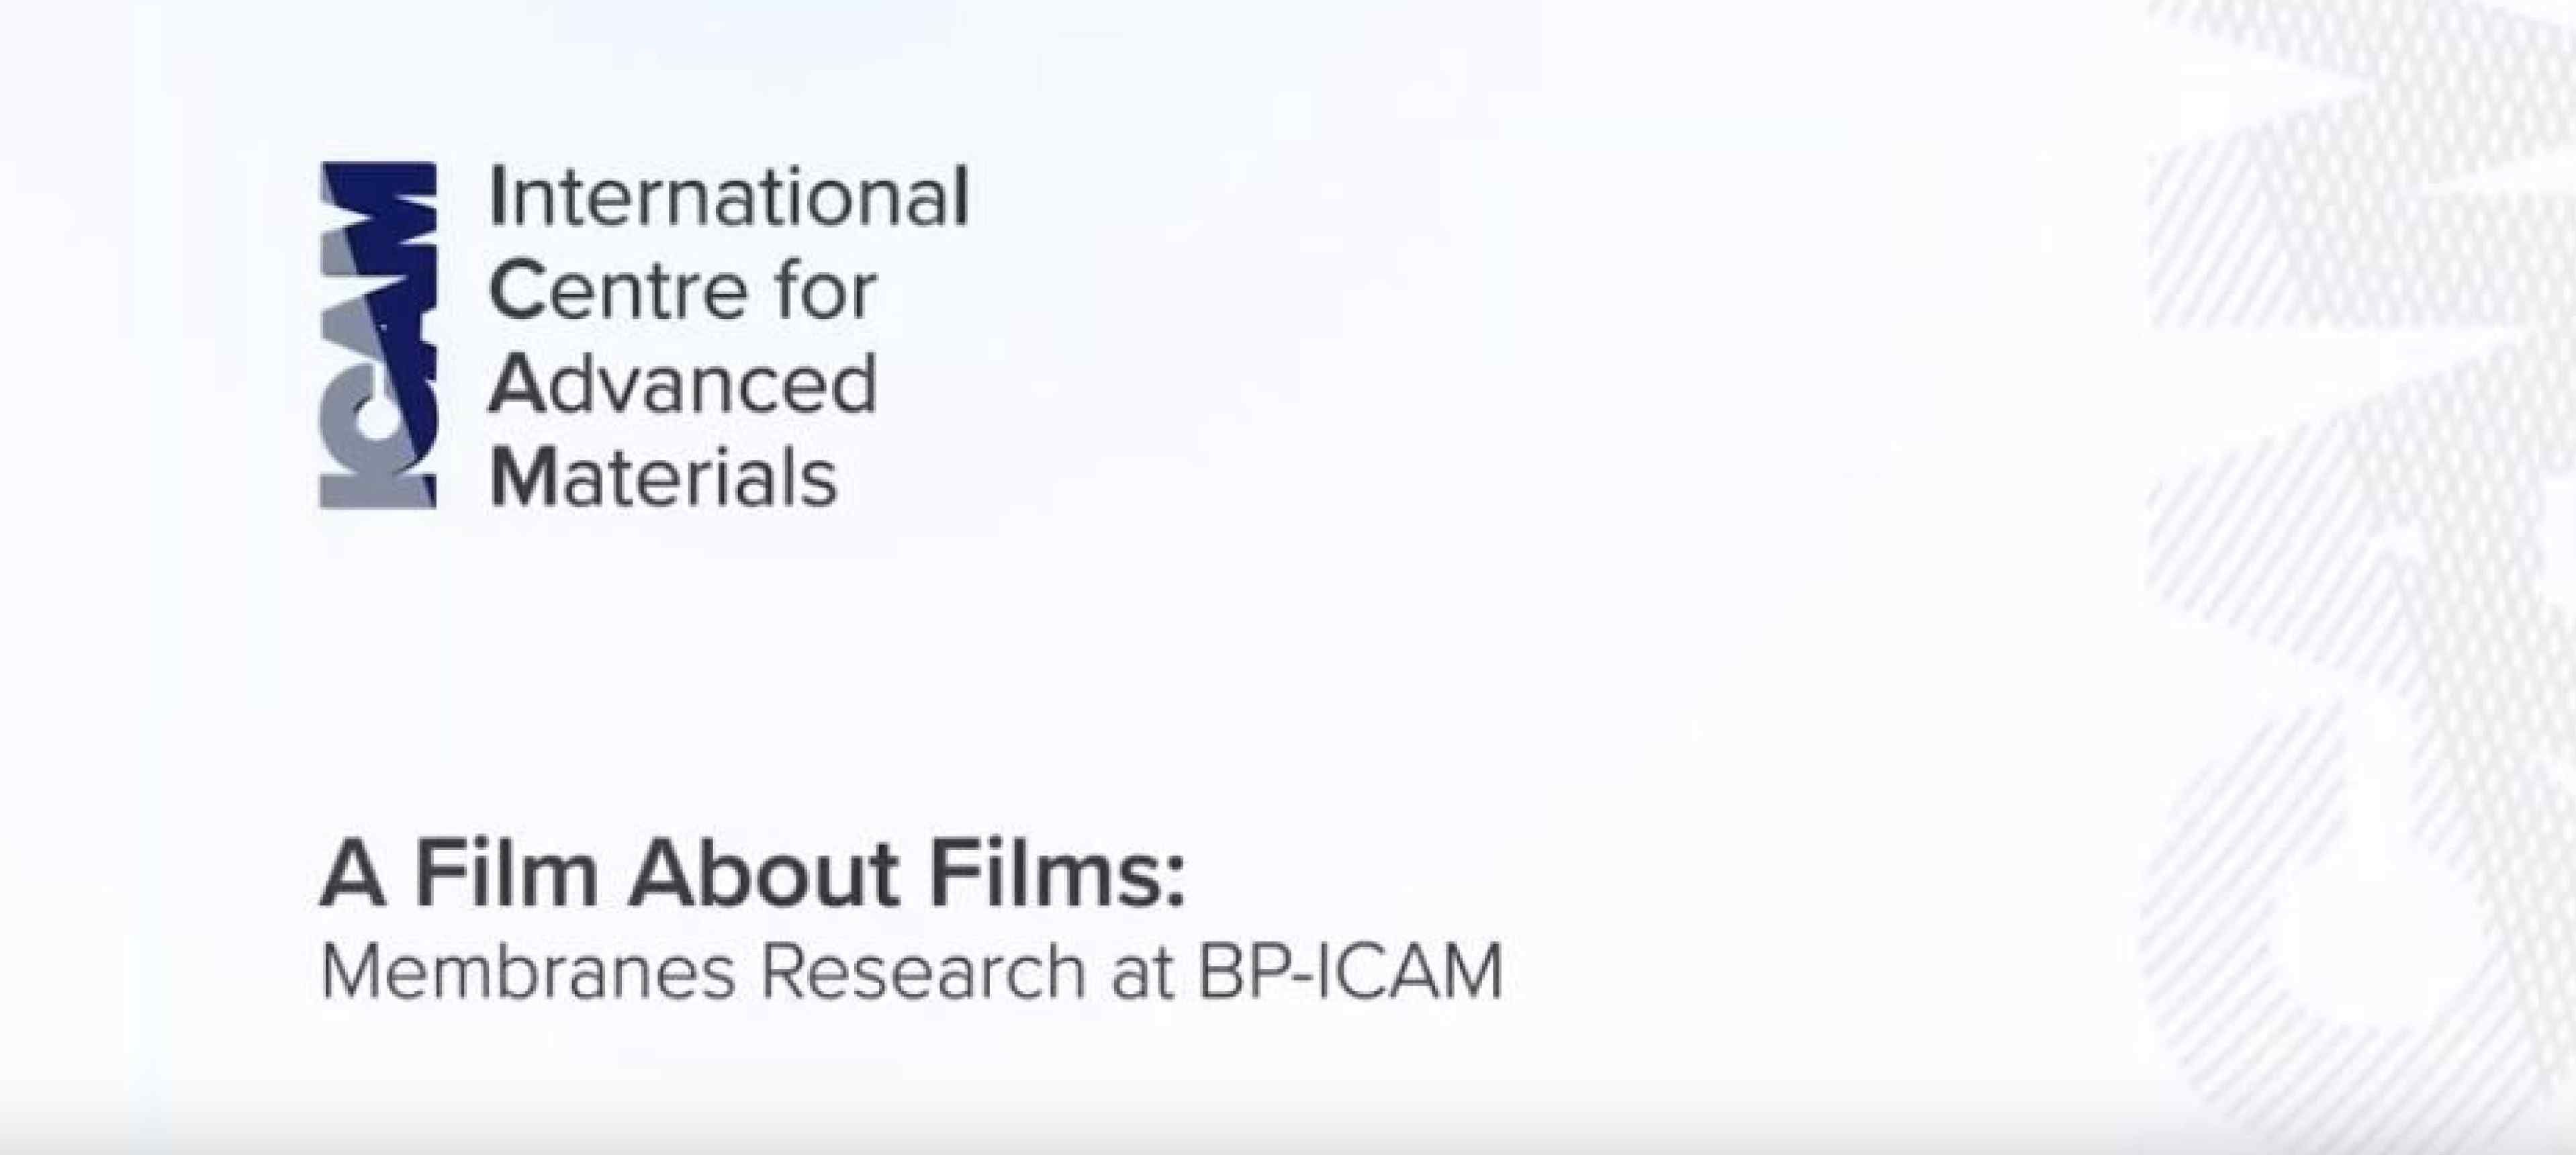 Video card for video by BP ICAM research about membranes